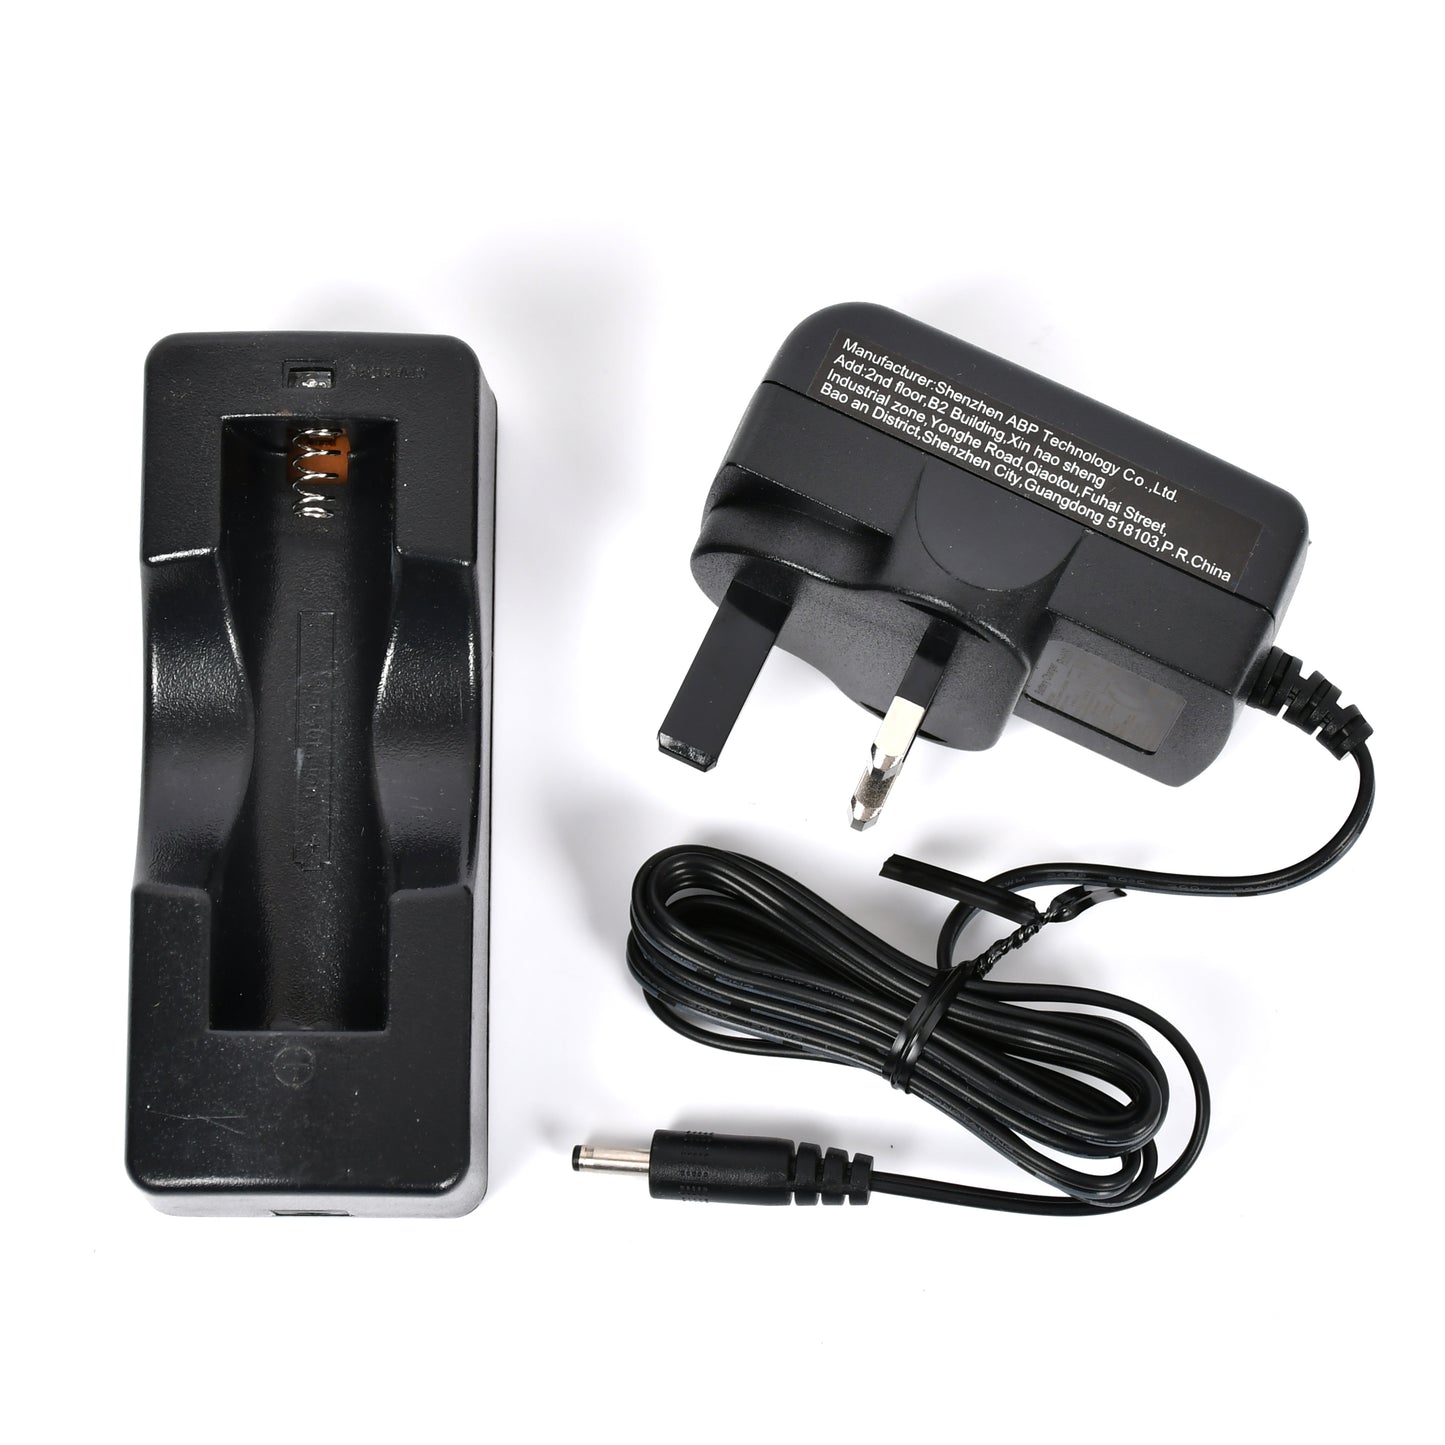 CH26B - Mains charger for multiple Li-ion battery products – click to see list